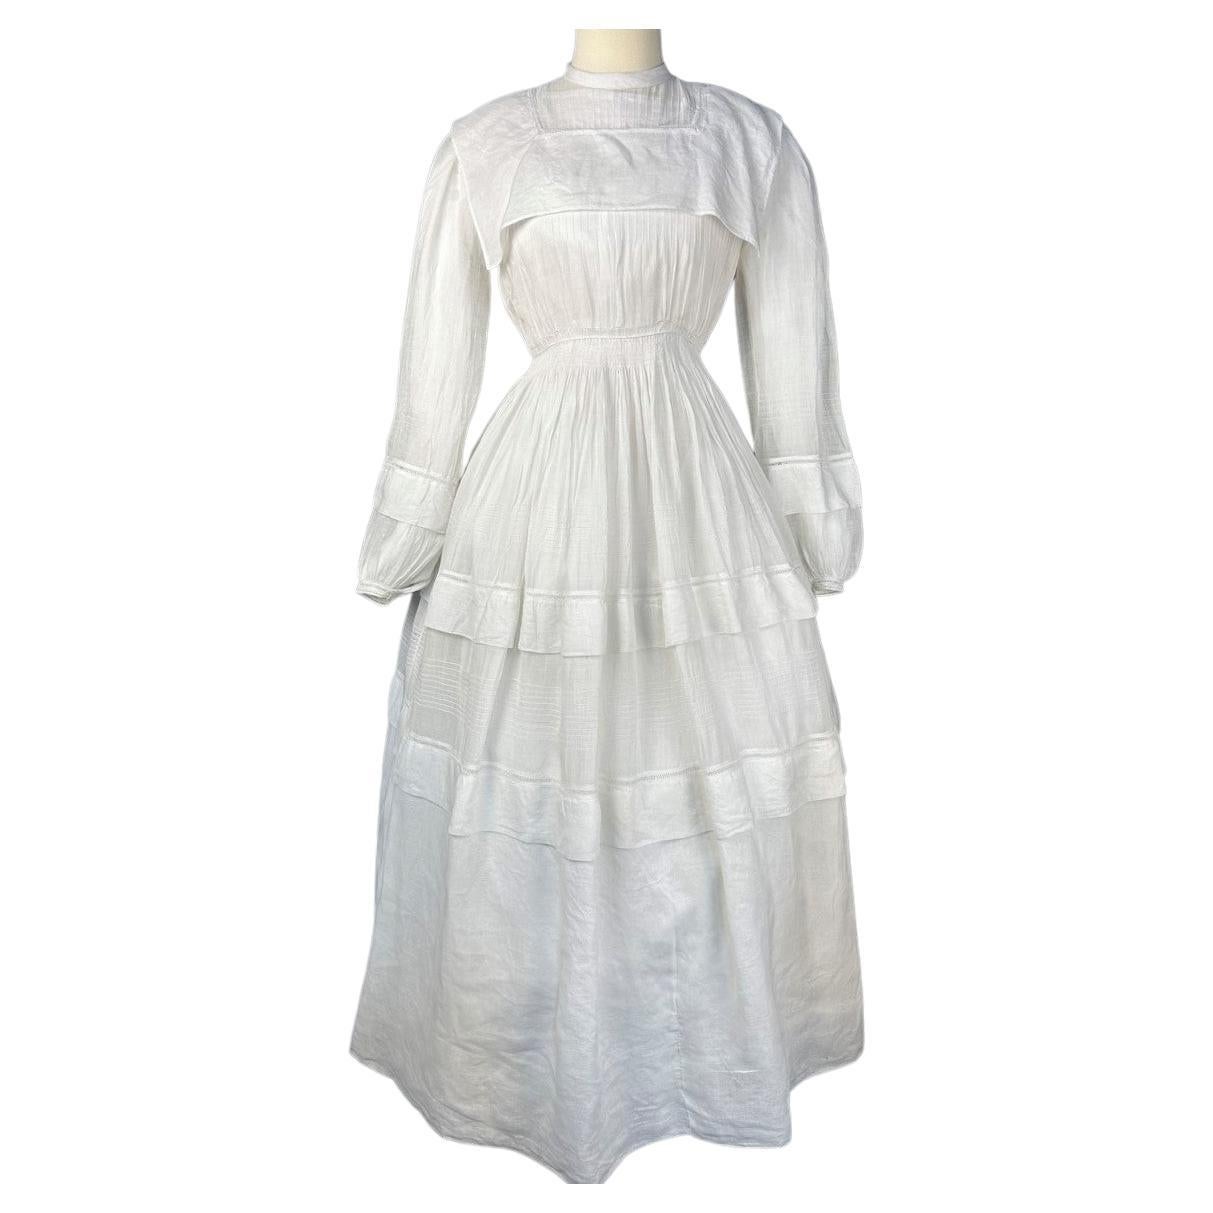 A pleated Cotton Gauze Crinoline Walking Day Dress - French Circa 1855 For Sale